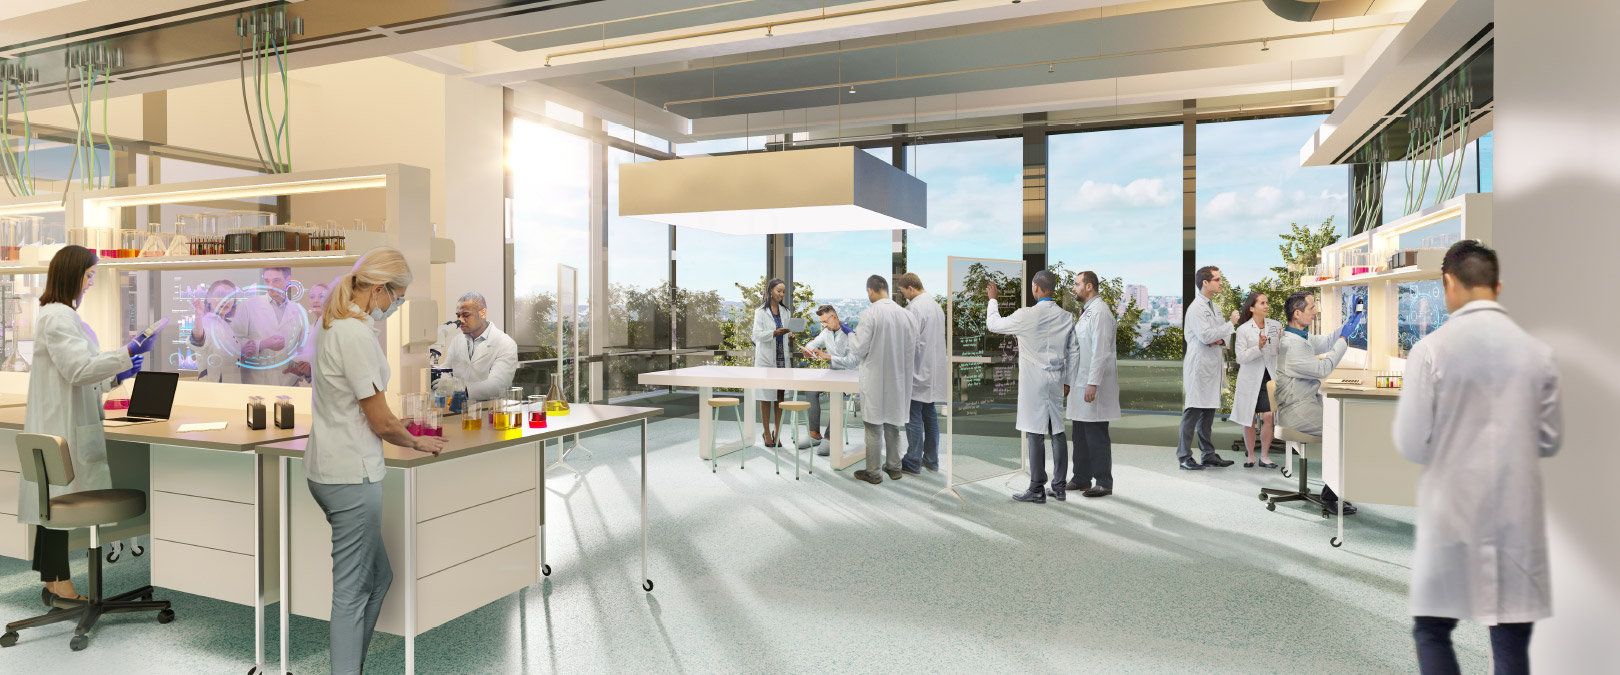 A rendering of a lab at 100 Chestnut featuring large windows and open space